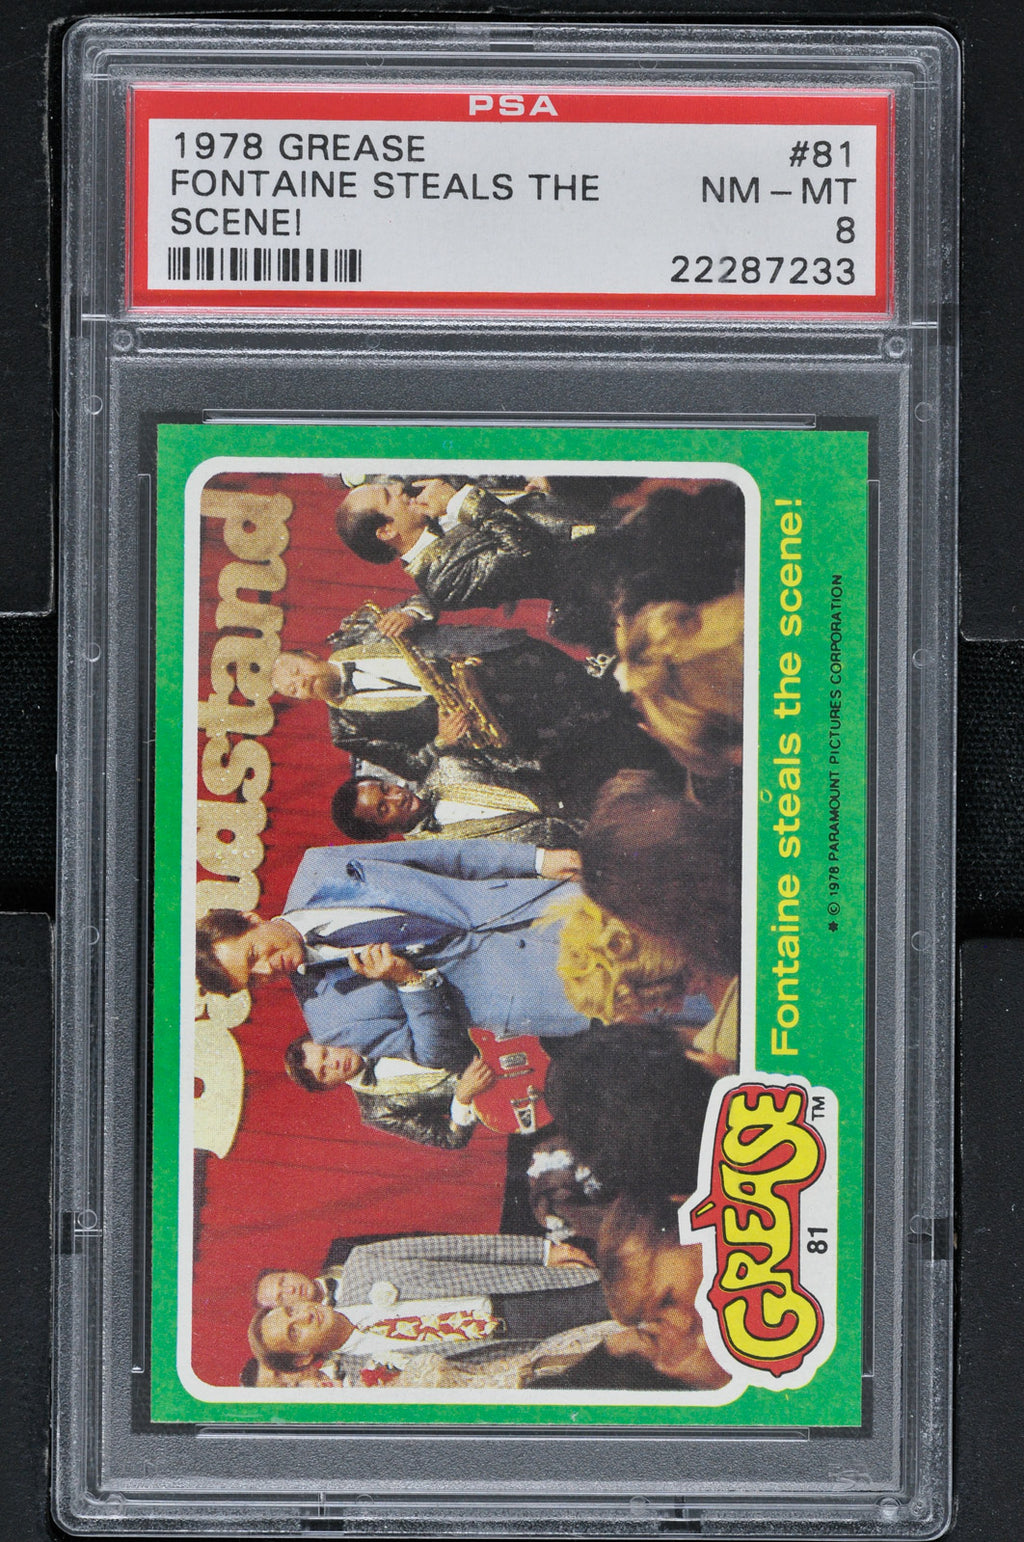 1978 - Topps Grease Series 2 #81 Fontaine Steals the Scene! - PSA 8